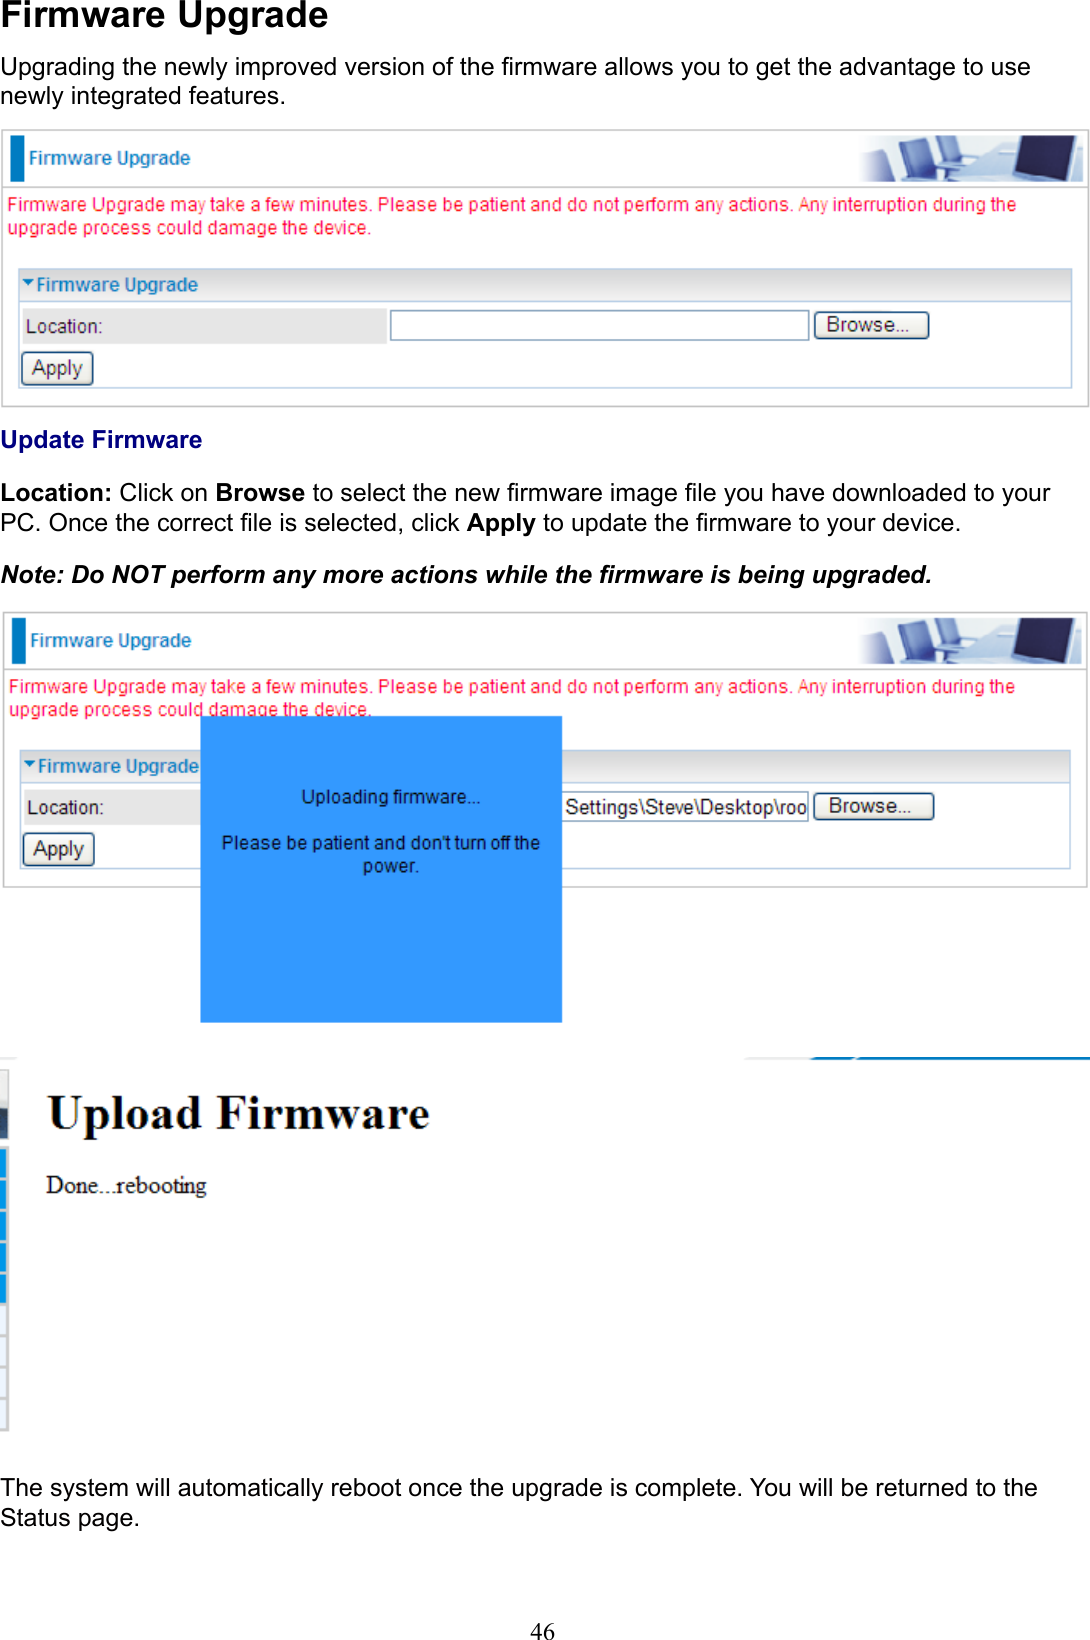 46Firmware UpgradeUpgrading the newly improved version of the rmware allows you to get the advantage to use newly integrated features.Update FirmwareLocation: Click on Browse to select the new rmware image le you have downloaded to your PC. Once the correct le is selected, click Apply to update the rmware to your device.Note: Do NOT perform any more actions while the rmware is being upgraded.The system will automatically reboot once the upgrade is complete. You will be returned to the Status page.